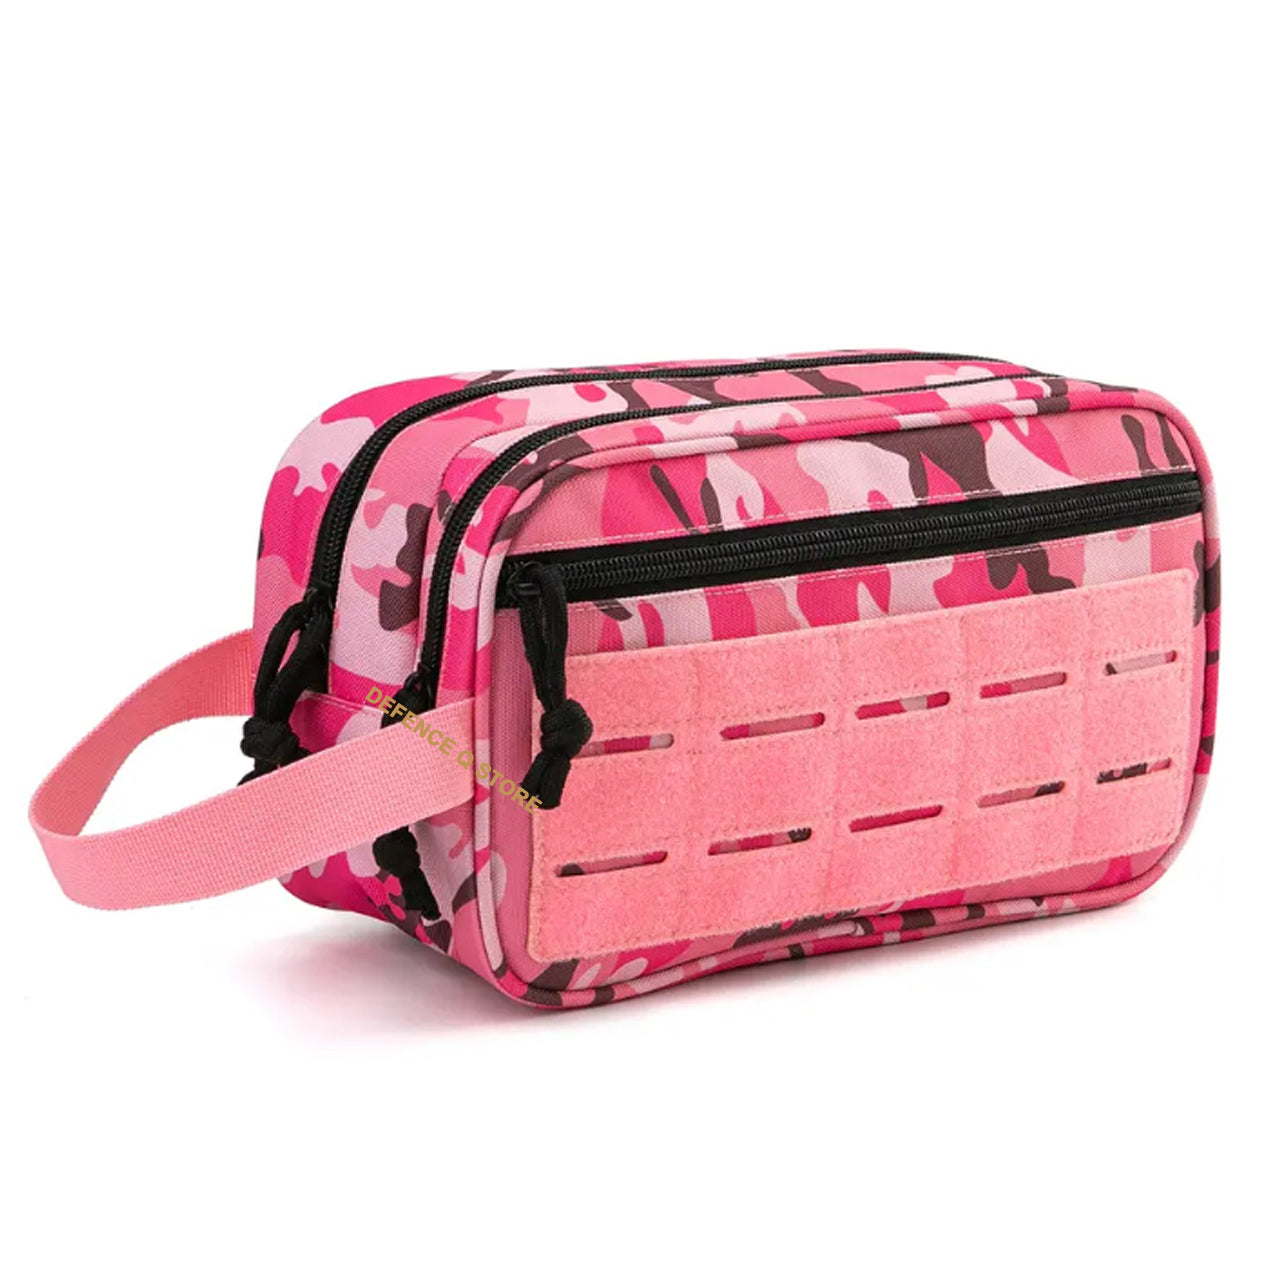 This Toiletry Bag is MOLLE capable and can be used for other gear, it's a must-have for any traveler. With dimensions of 15cm (H) x 26cm (W) x 11cm (D), it's perfect for storing toiletries and accessories. Made from 900D fabric material, it boasts a sleek and durable design. www.defenceqstore.com.au